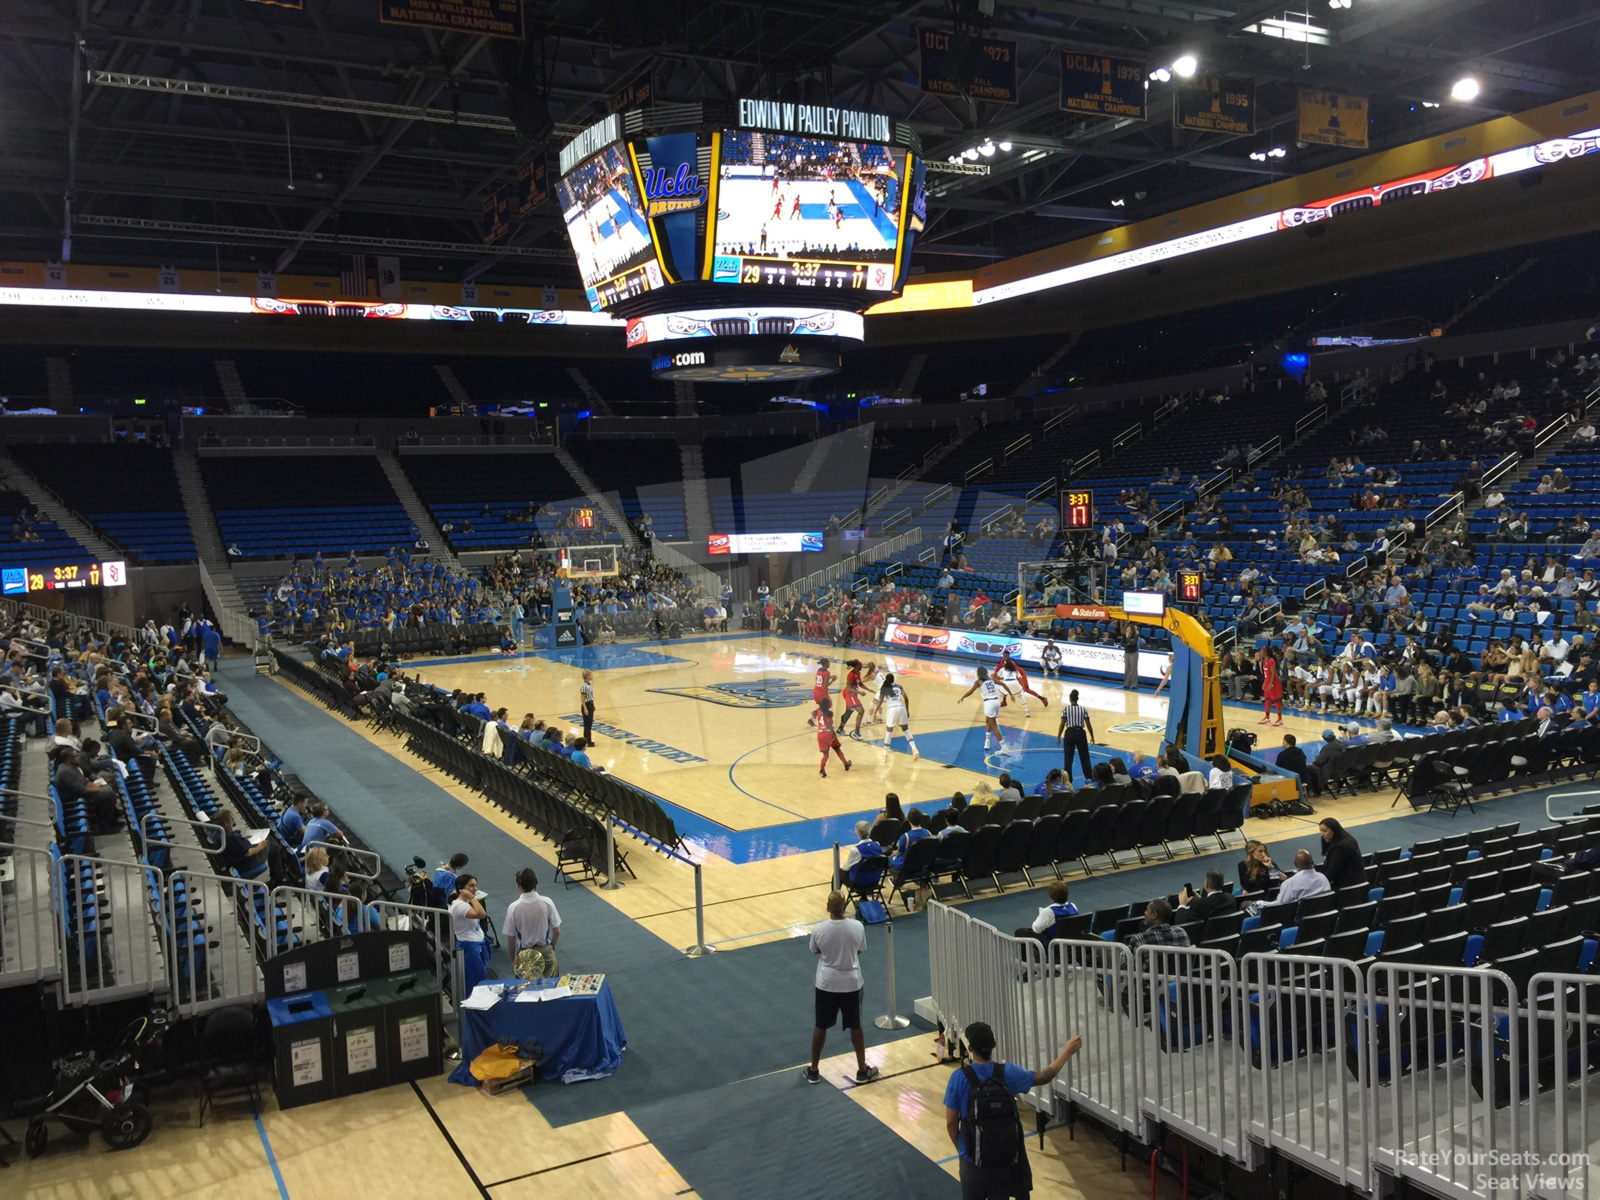 section 111, row 3 seat view  - pauley pavilion